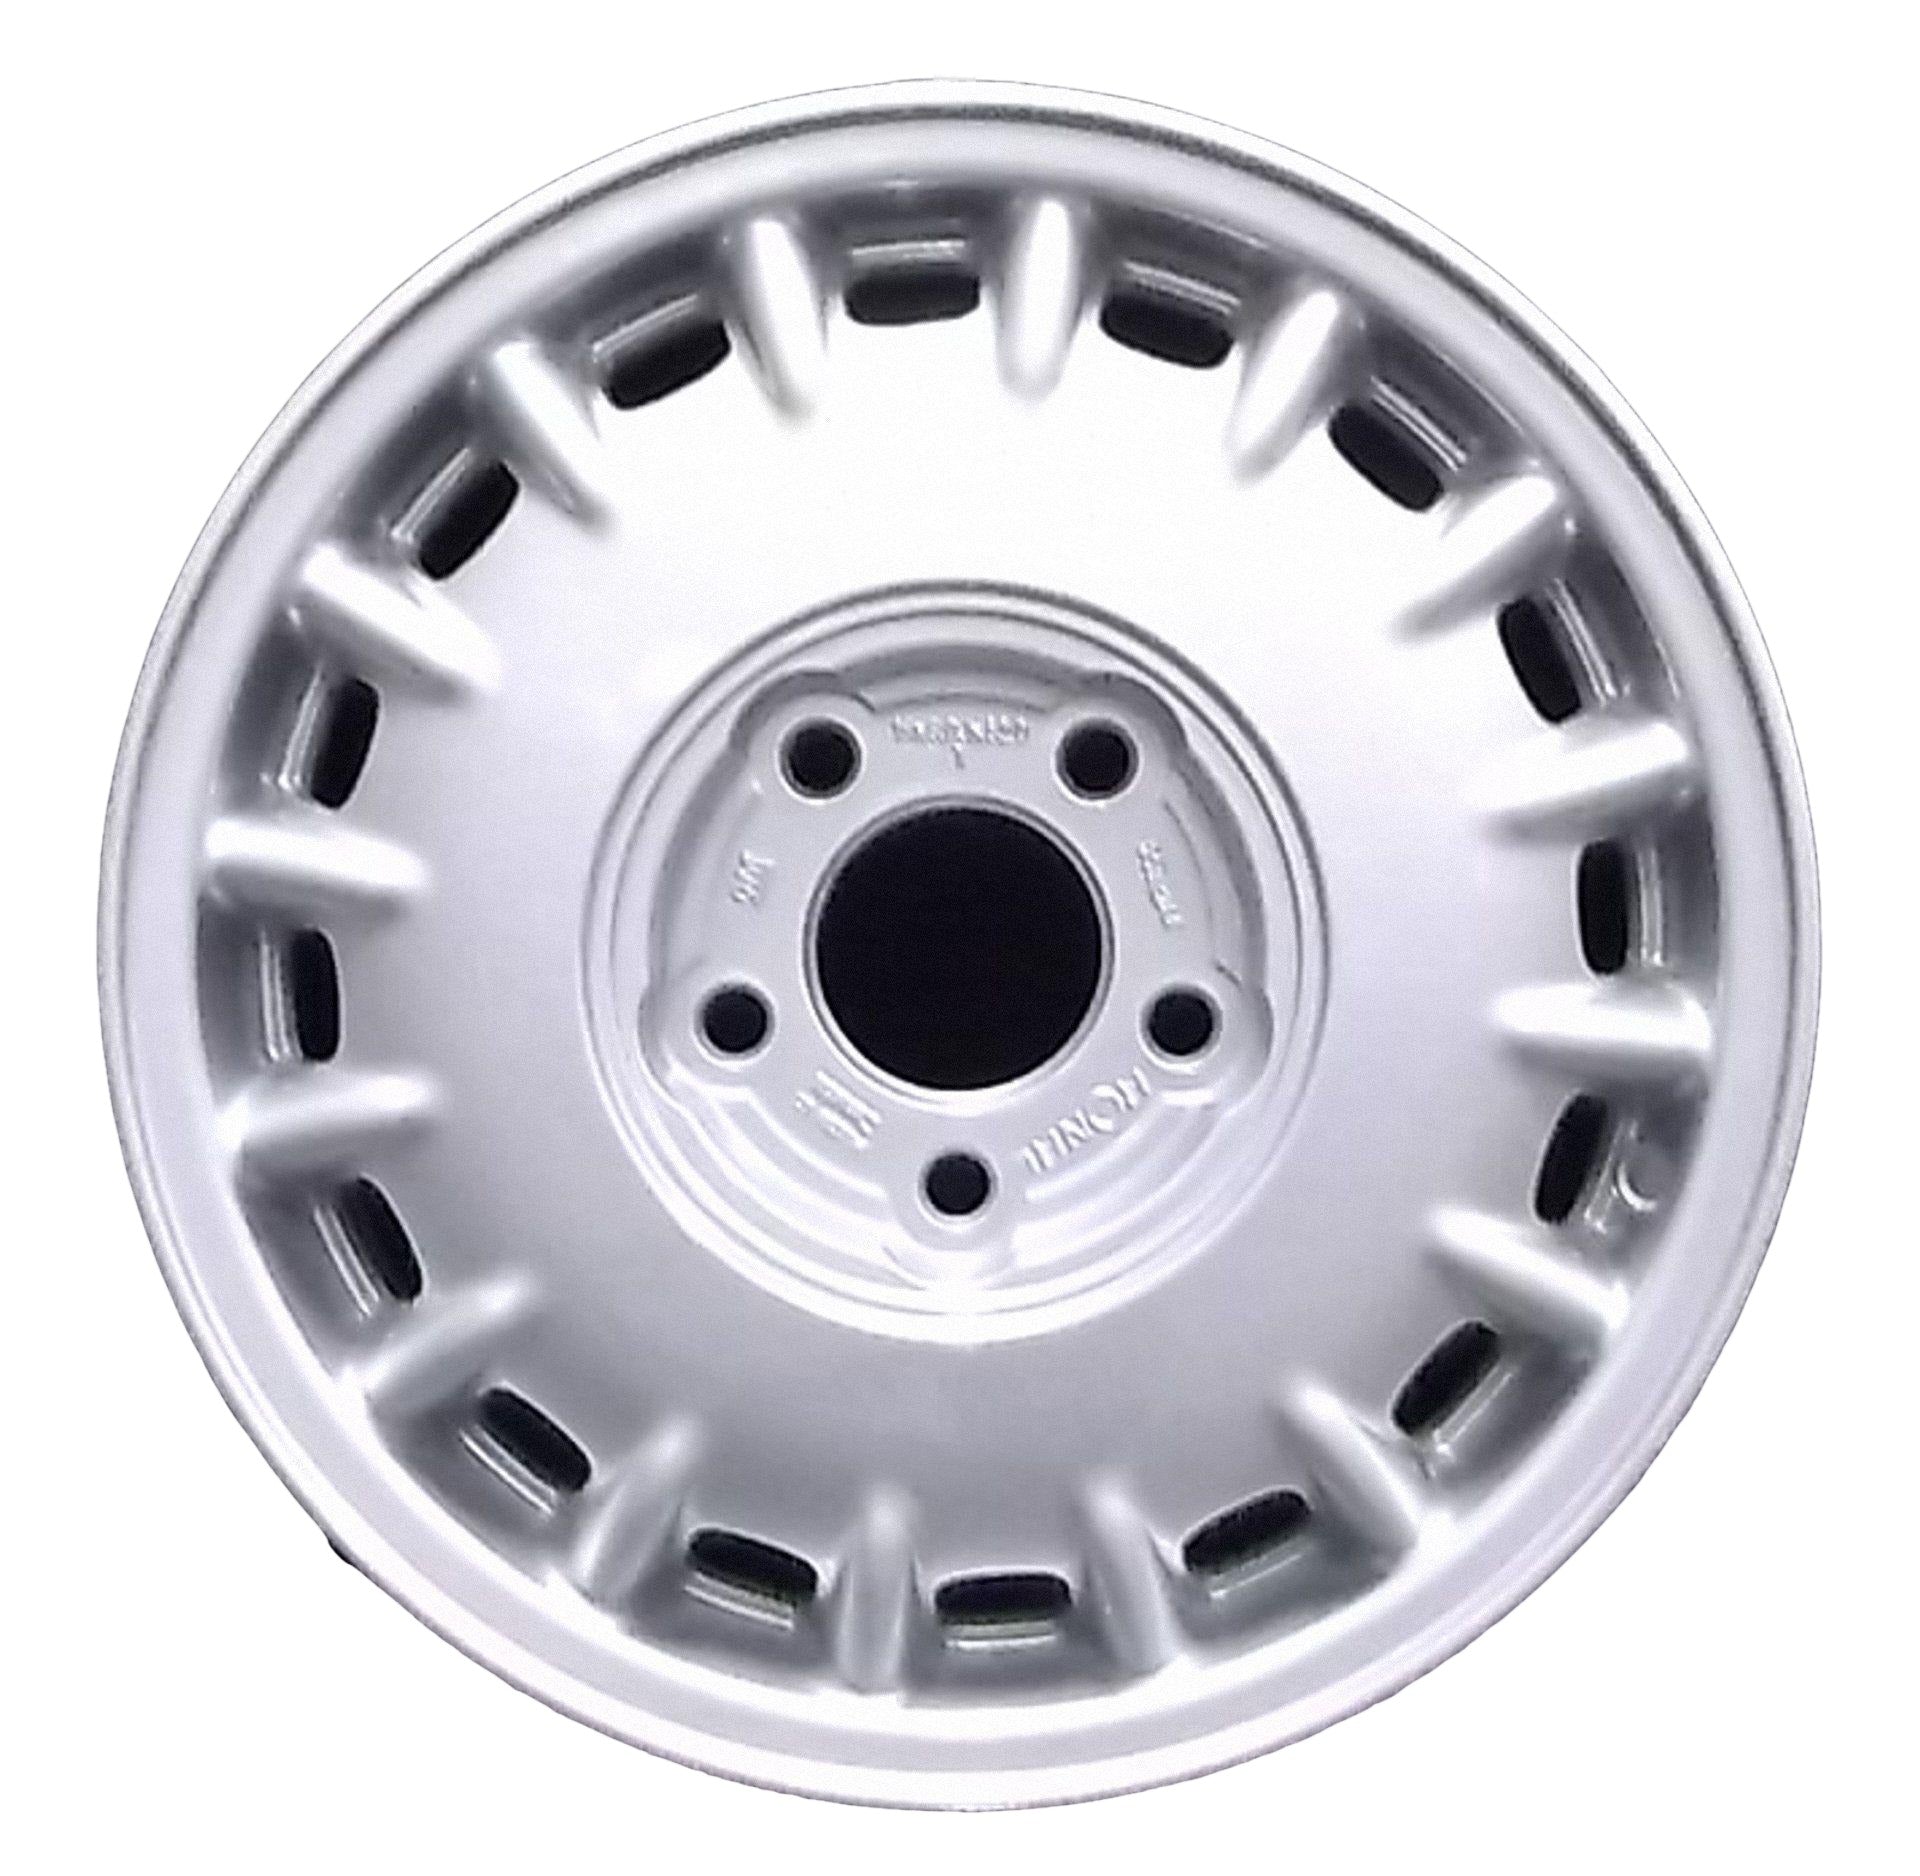 Buick Century  1997, 1998, 1999, 2000, 2001, 2002 Factory OEM Car Wheel Size 15x6 Alloy WAO.4027.PS02.FF